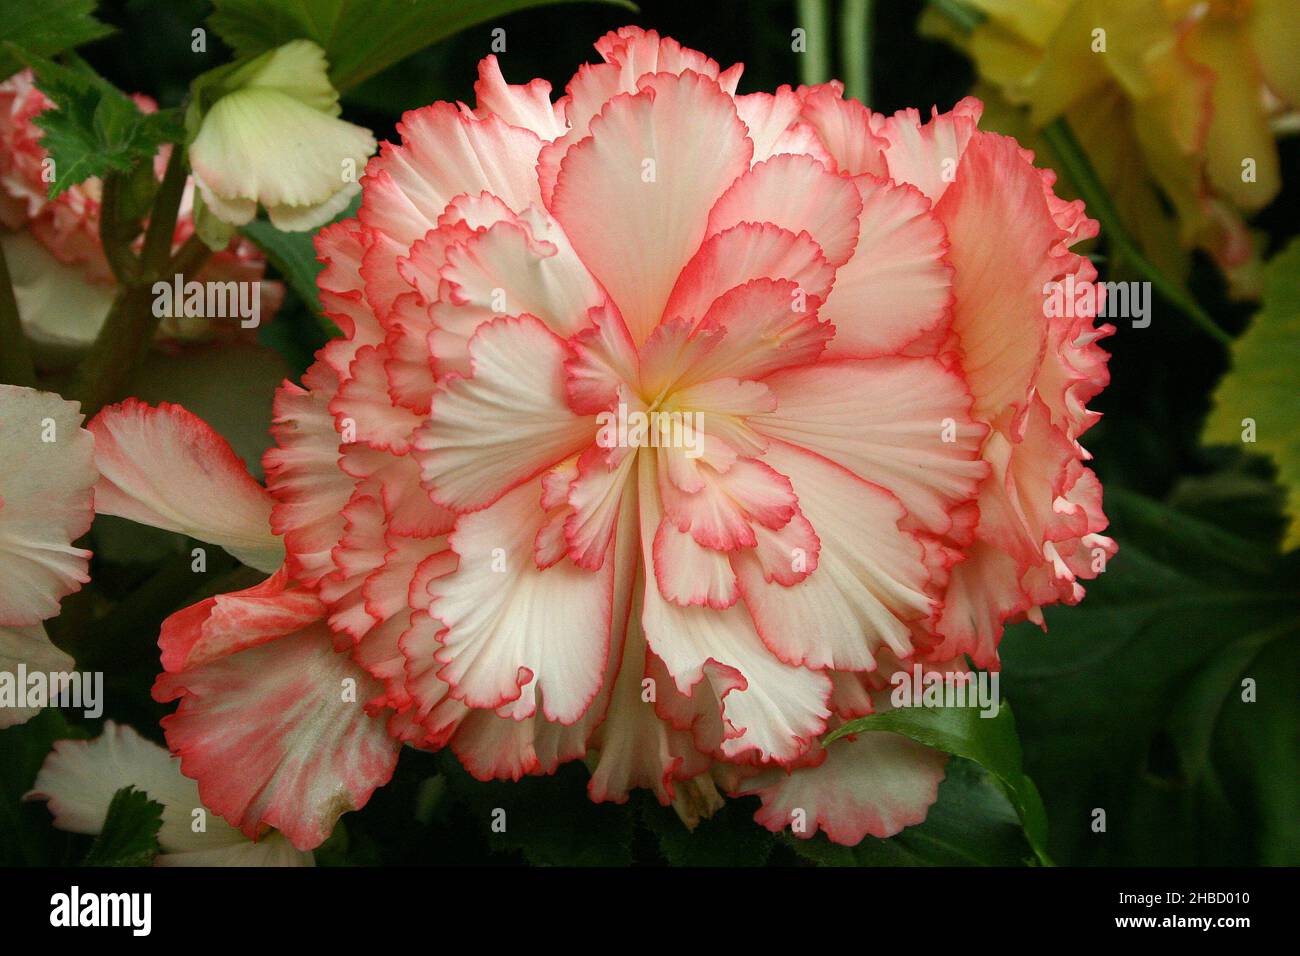 CLOSE-UP OF A BEAUTIFUL WHITE BEGONIA FLOWER WITH PINK EDGING. Stock Photo